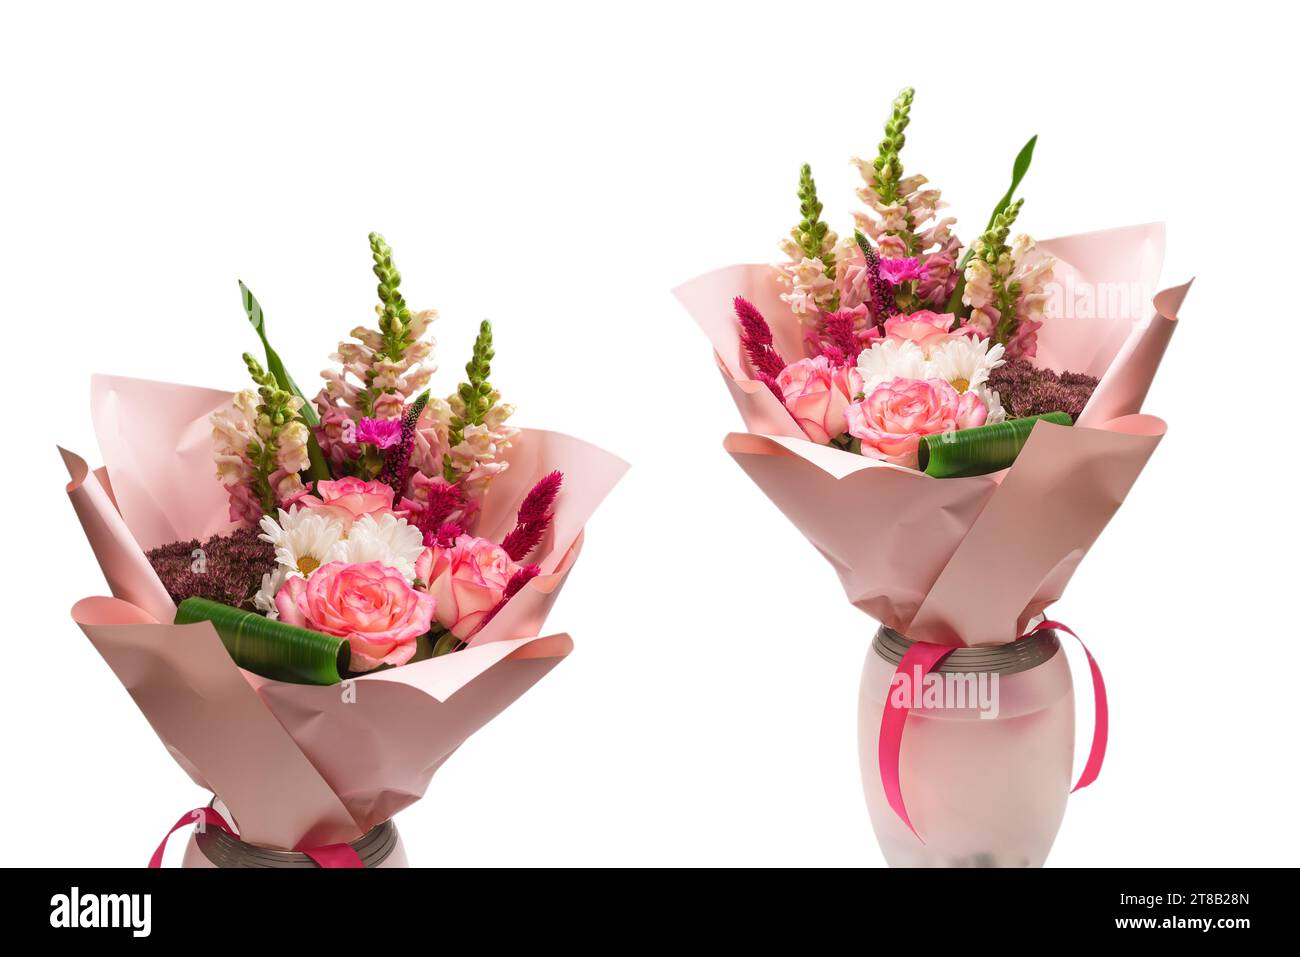 Bouquet of Soft Pink Flowers in Pink Wrapping Paper Stock Photo